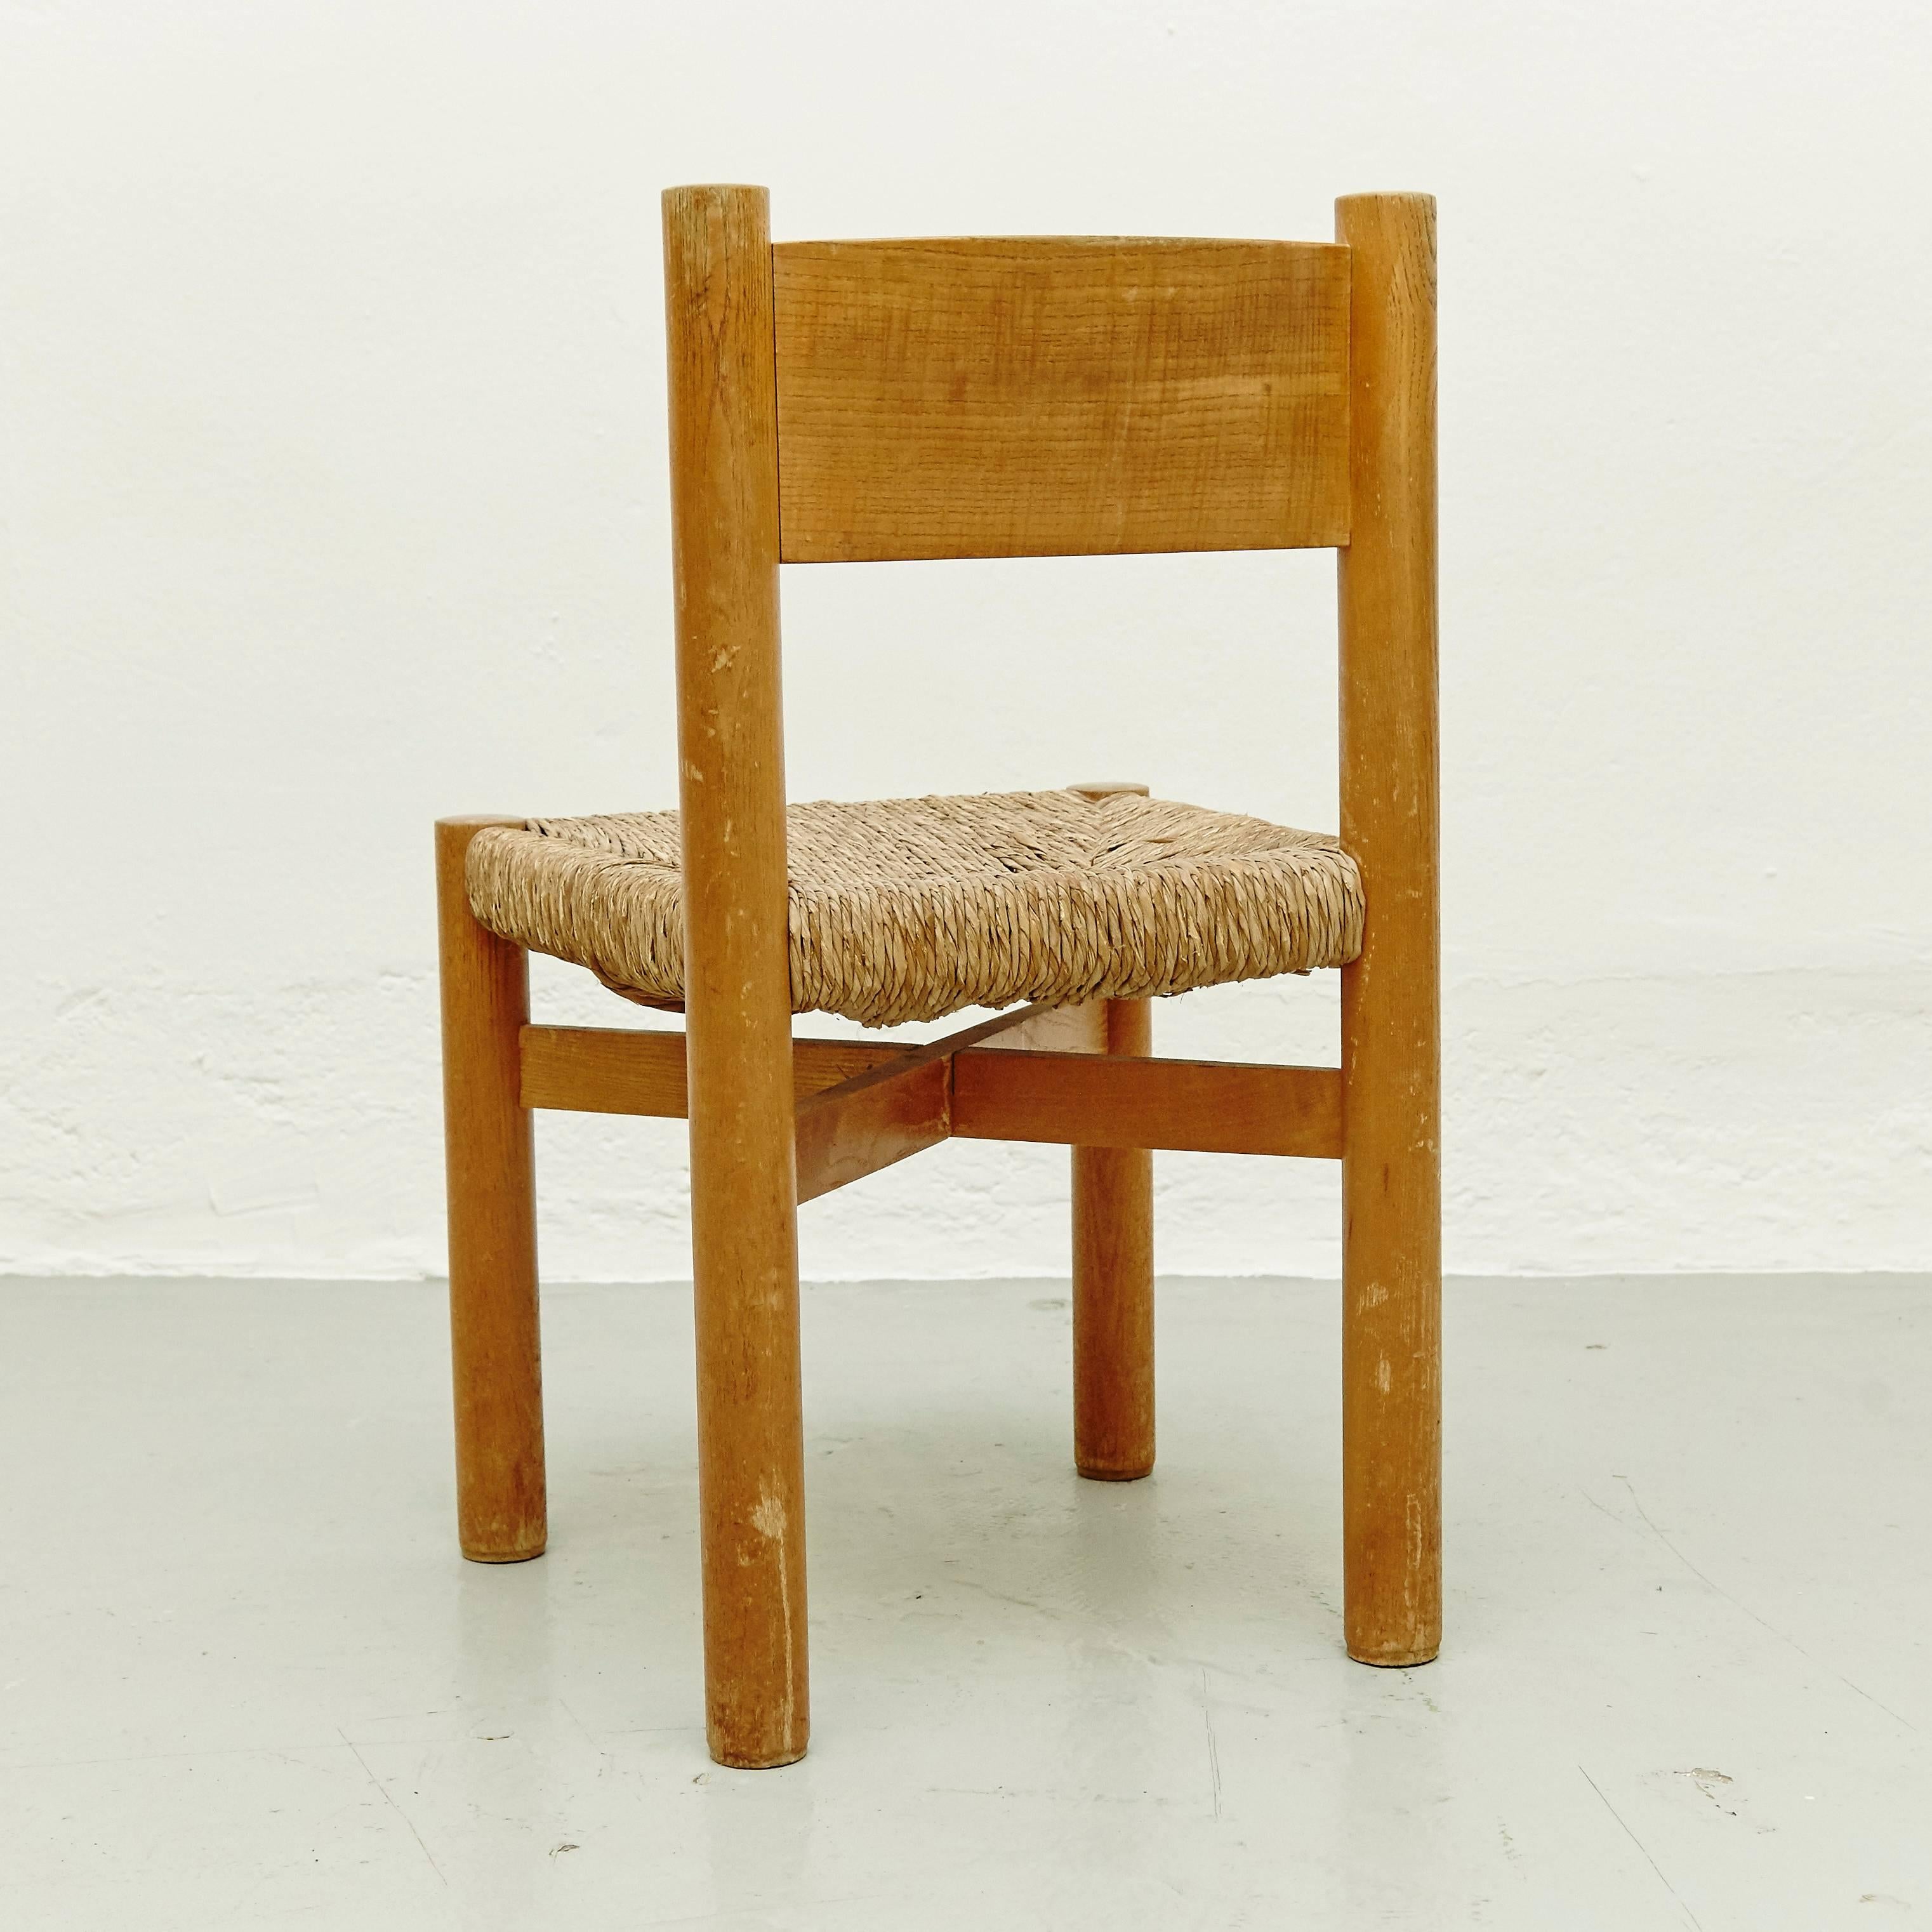 Chair model meribel, designed by Charlotte Perriand, circa 1950, manufactured in France.

Wood and rattan.

In good original condition, with minor wear consistent with age and use, preserving a beautiful patina.

Charlotte Perriand (1903-1999)